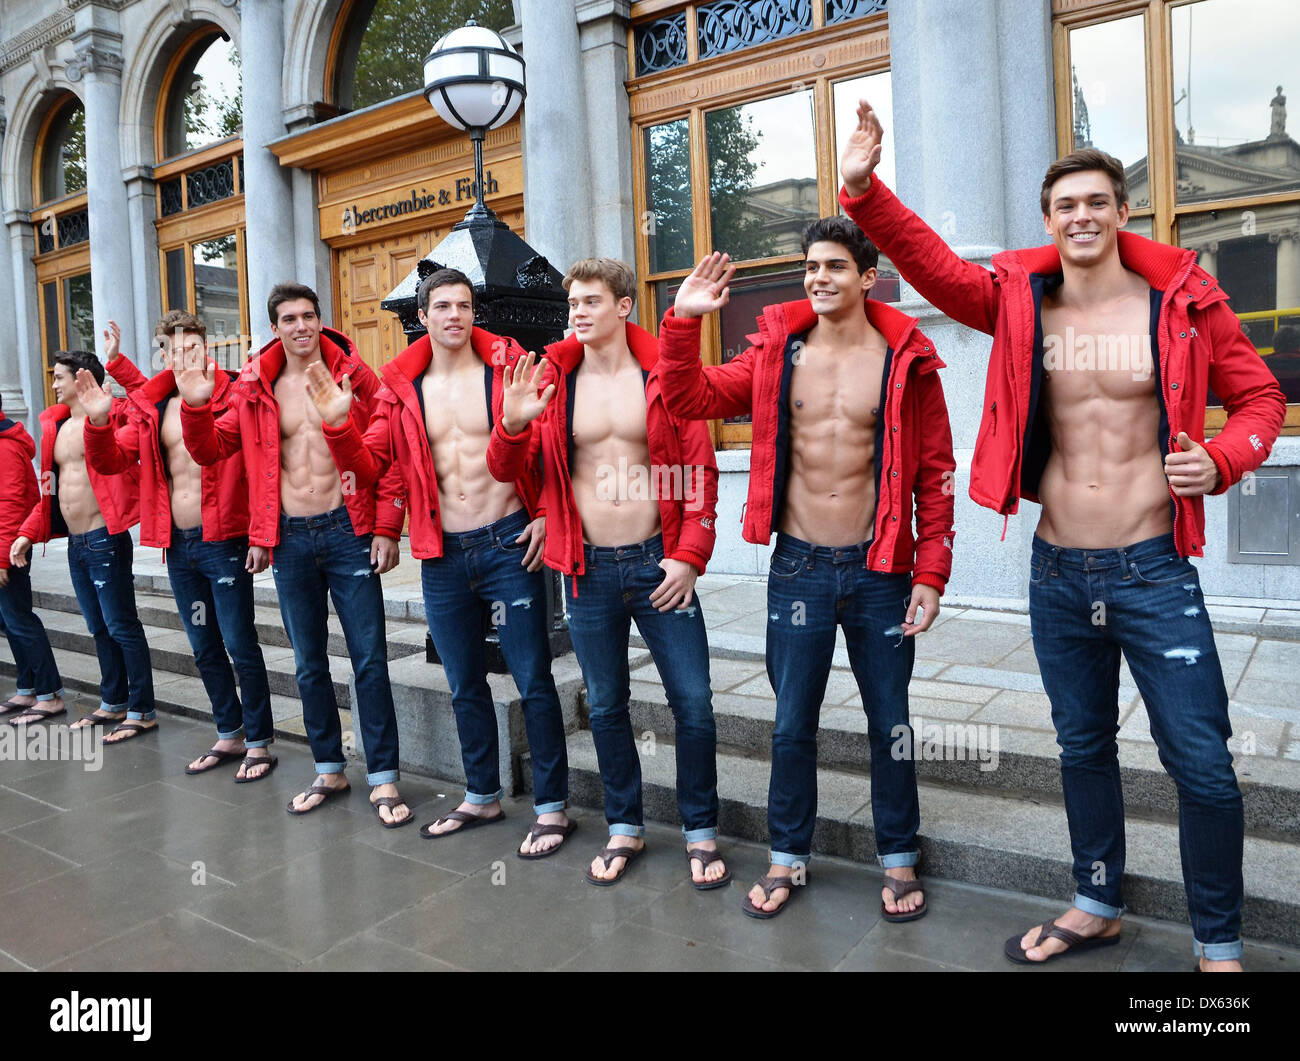 abercrombie and fitch america